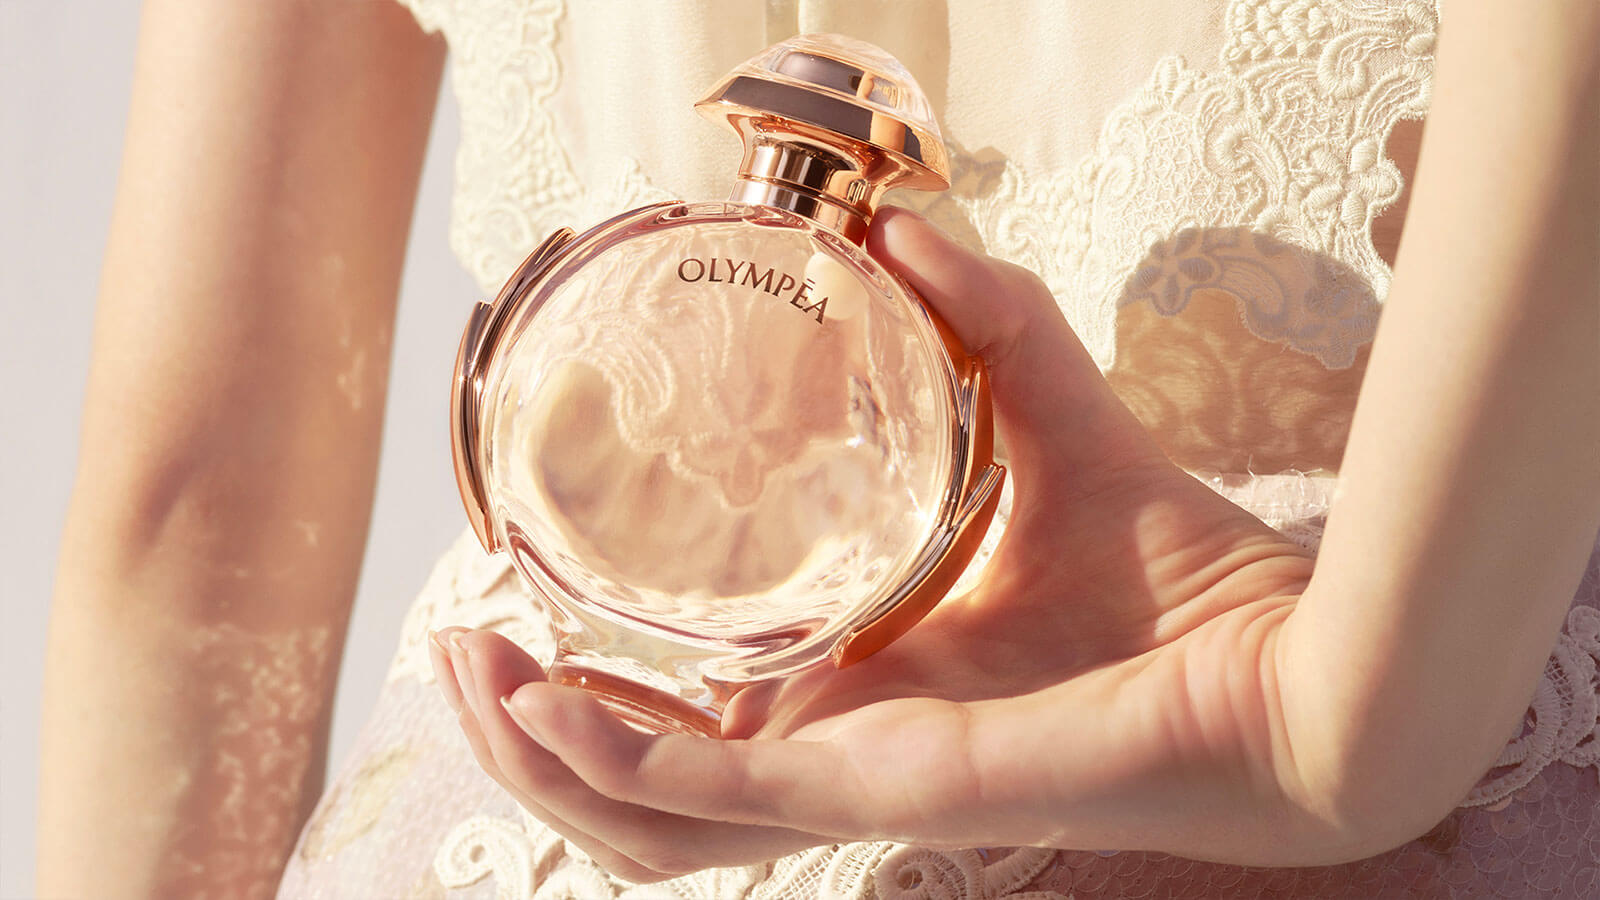 Top 10 Most Expensive Luxury Perfume Brands for Women (with prices)